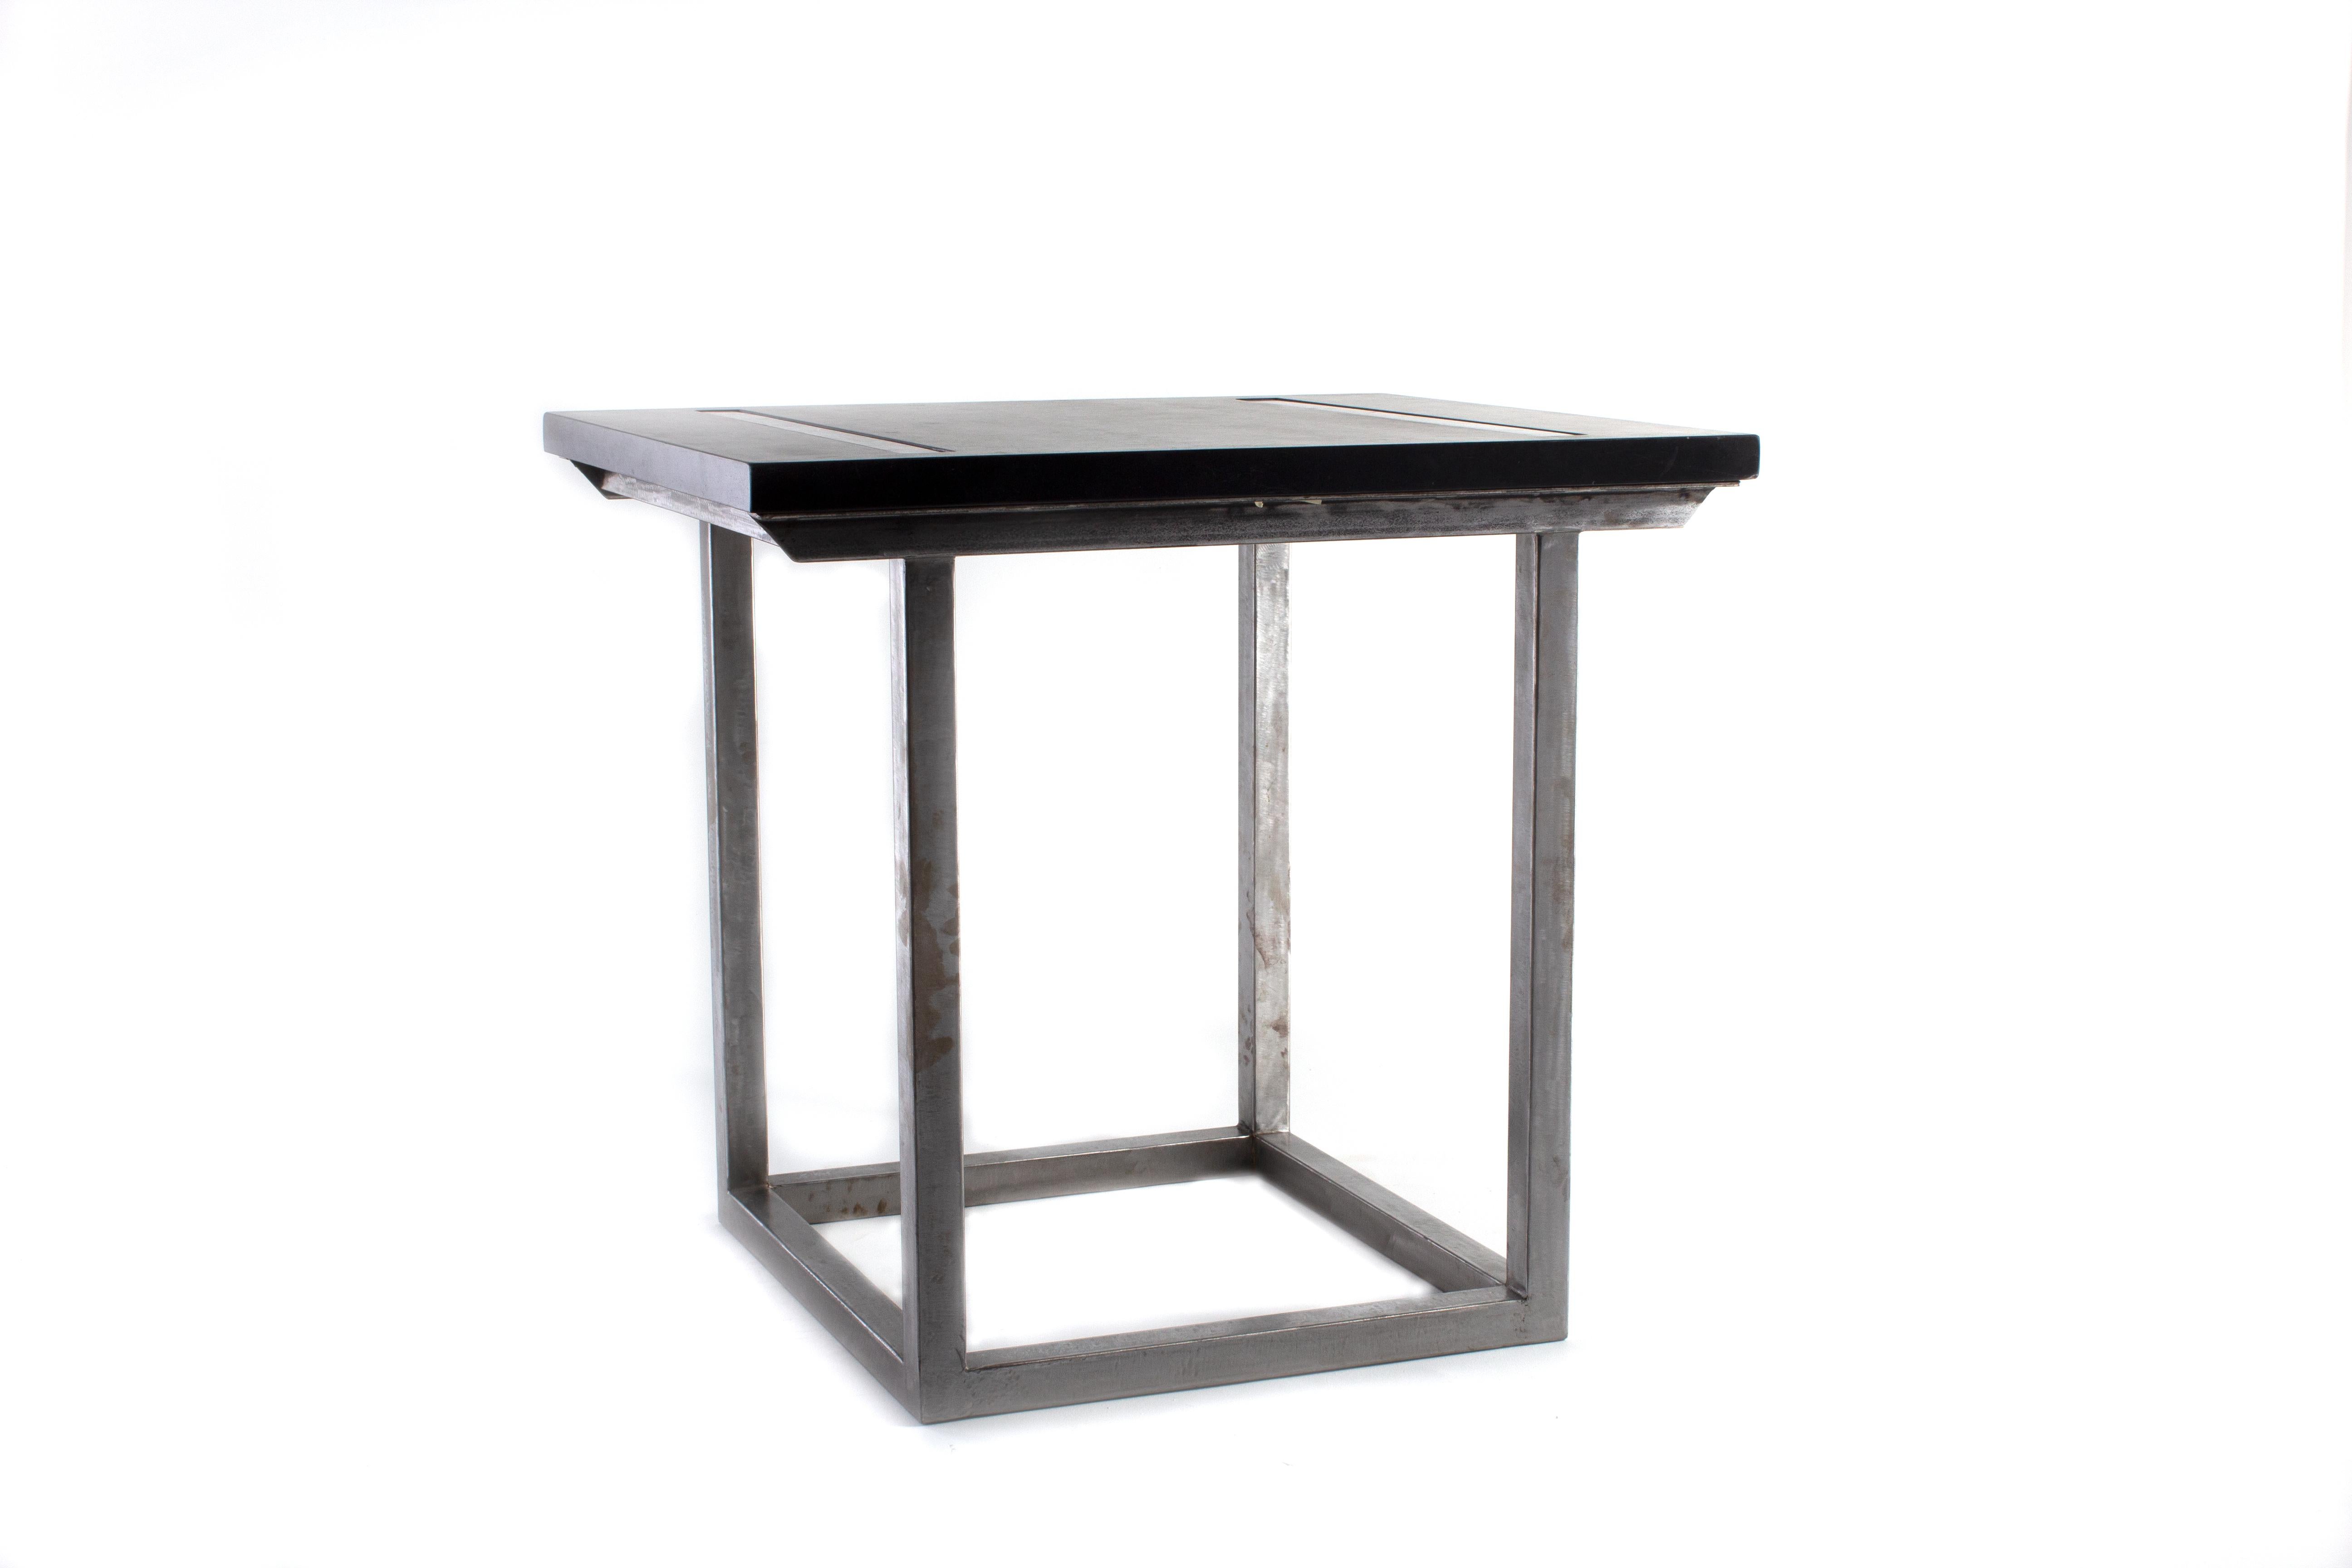 Bar table with polished steel base and ebonized limestone top.

Designed by Brendan Bass for the Vision and Design Collection, by using high quality materials and textures. All materials are sourced from local vendors throughout the state of Texas.